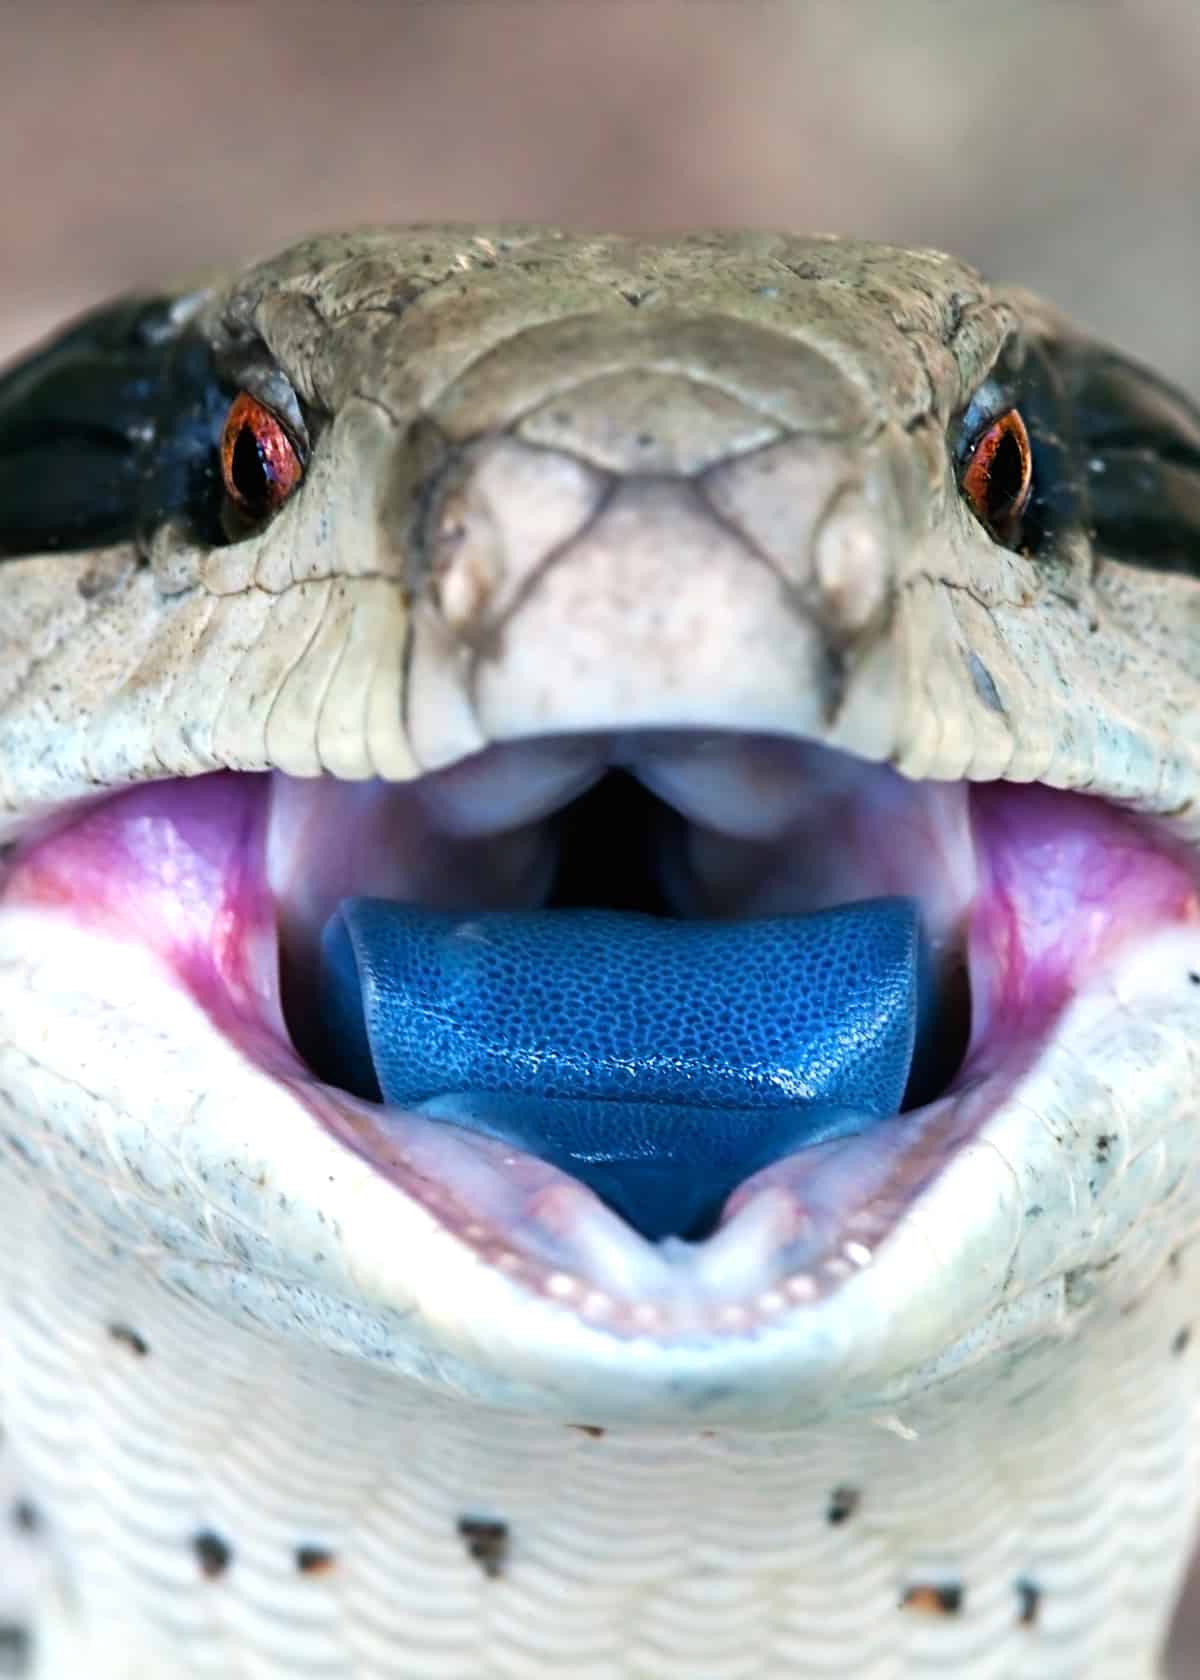 Facts about blue-tongued skinks